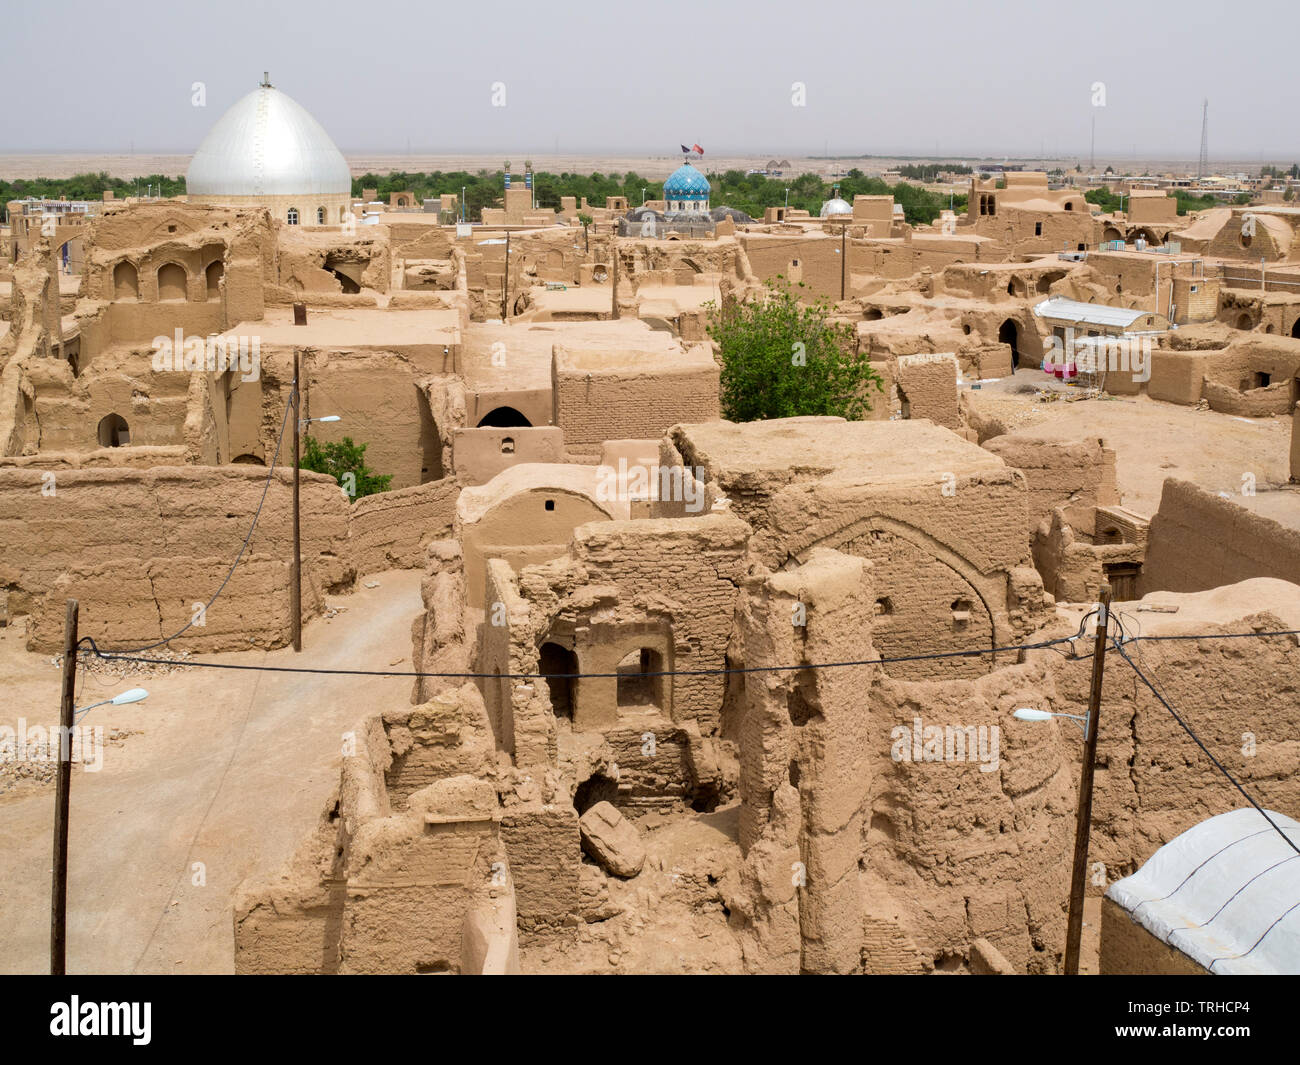 A view over the town of Aqda, Yazd Province, Iran. The ancient town and caravansarai are being restored for tourism. Stock Photo